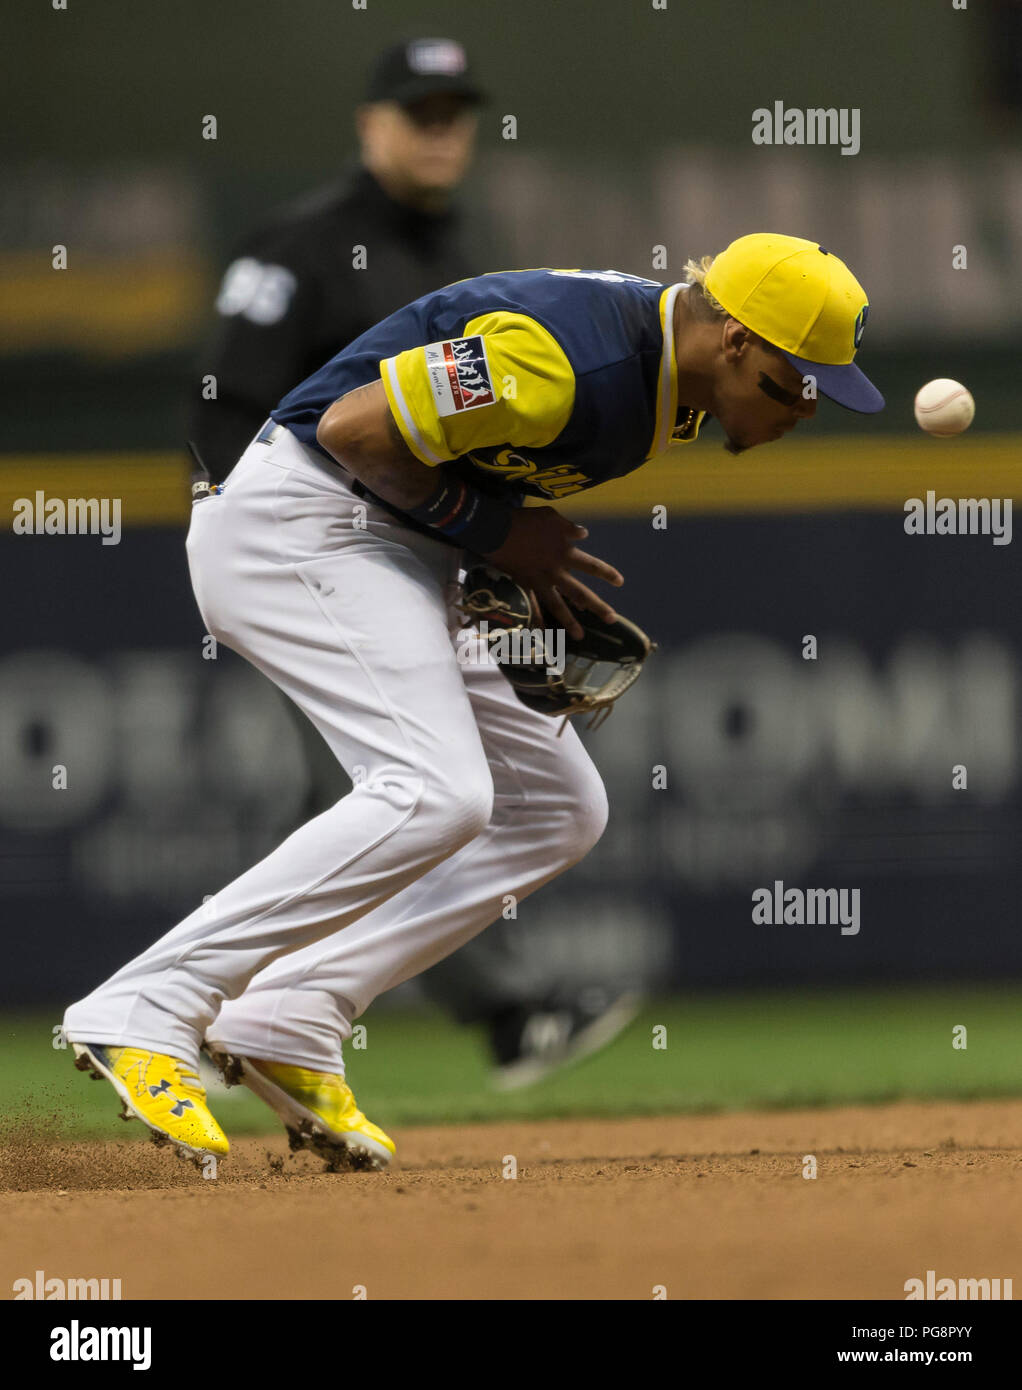 5,751 Orlando Arcia Photos & High Res Pictures - Getty Images